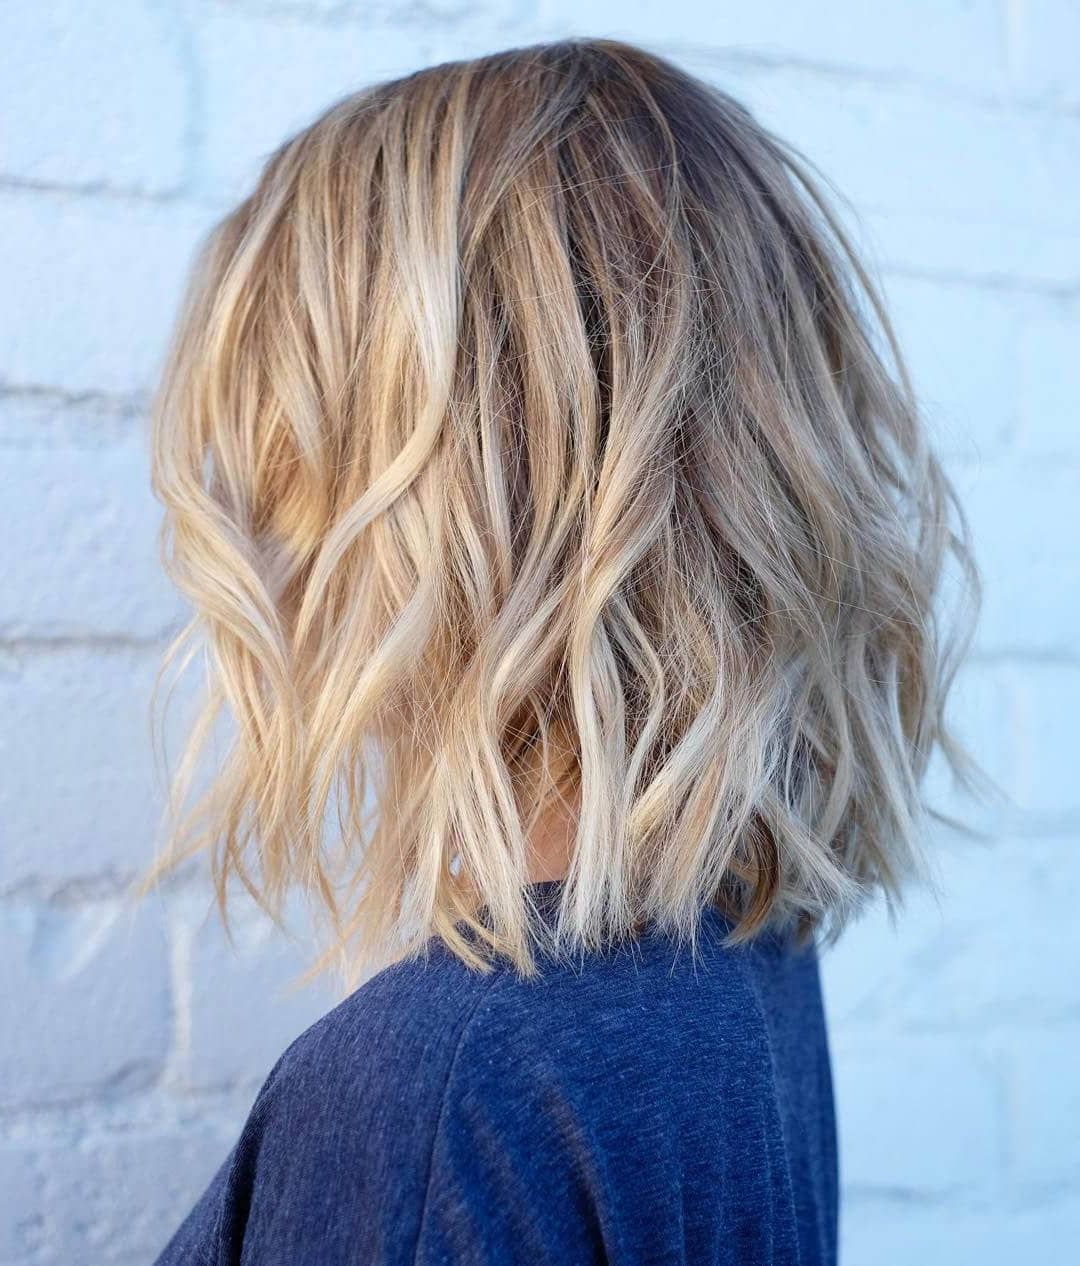 50 Fresh Short Blonde Hair Ideas To Update Your Style In 2018 Intended For Dark Blonde Short Curly Hairstyles (Photo 9 of 25)